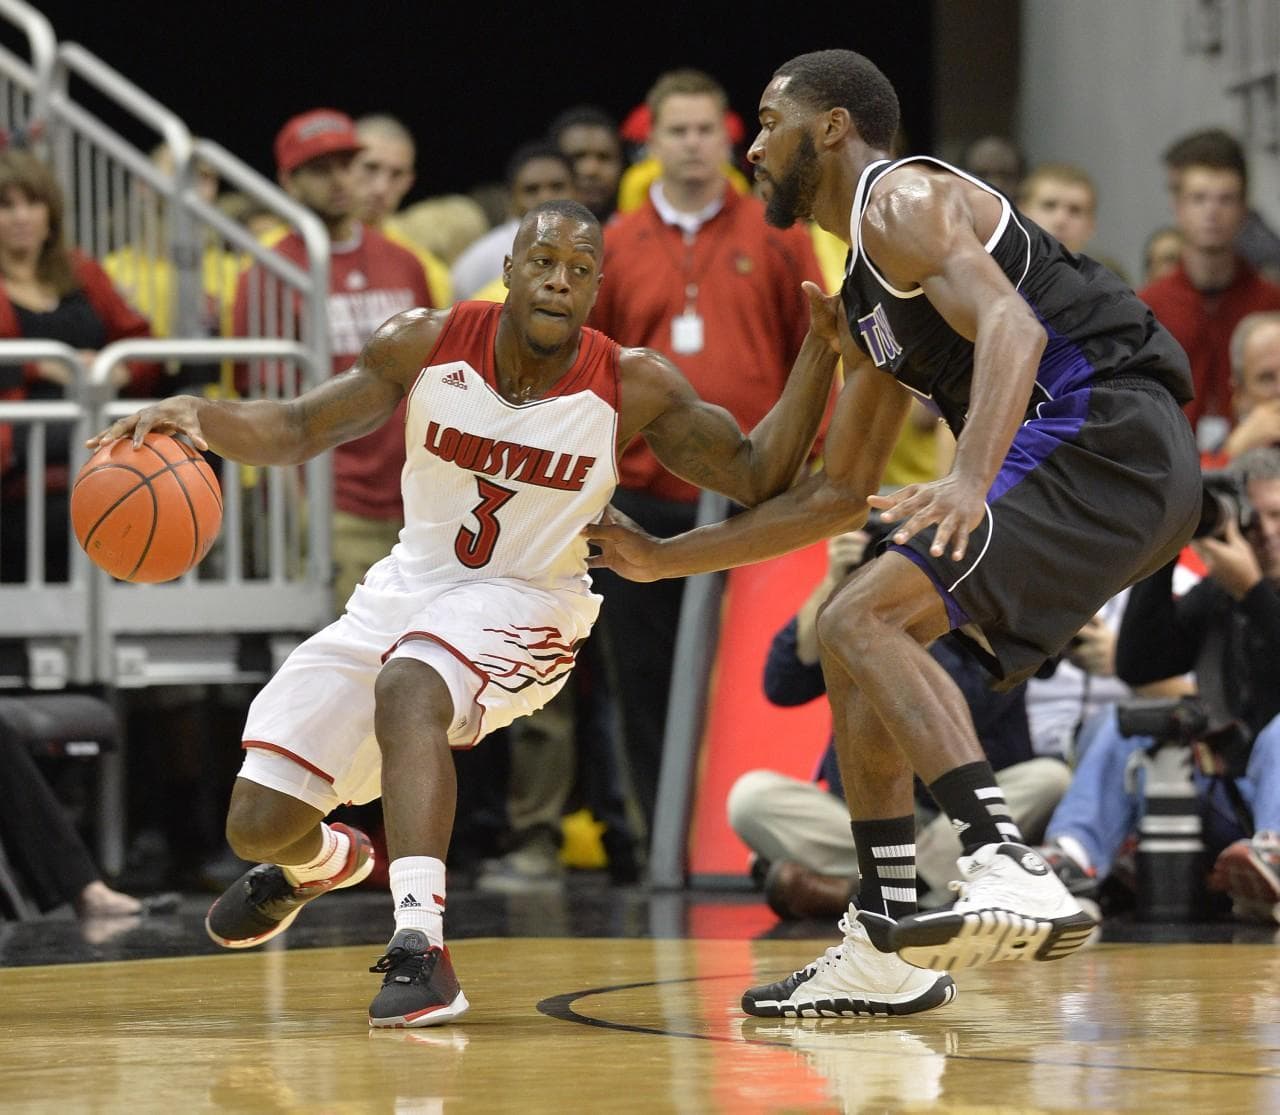 Louisville is an early favorite to win this year's NCAA Championship. (Timothy D. Easley/AP)